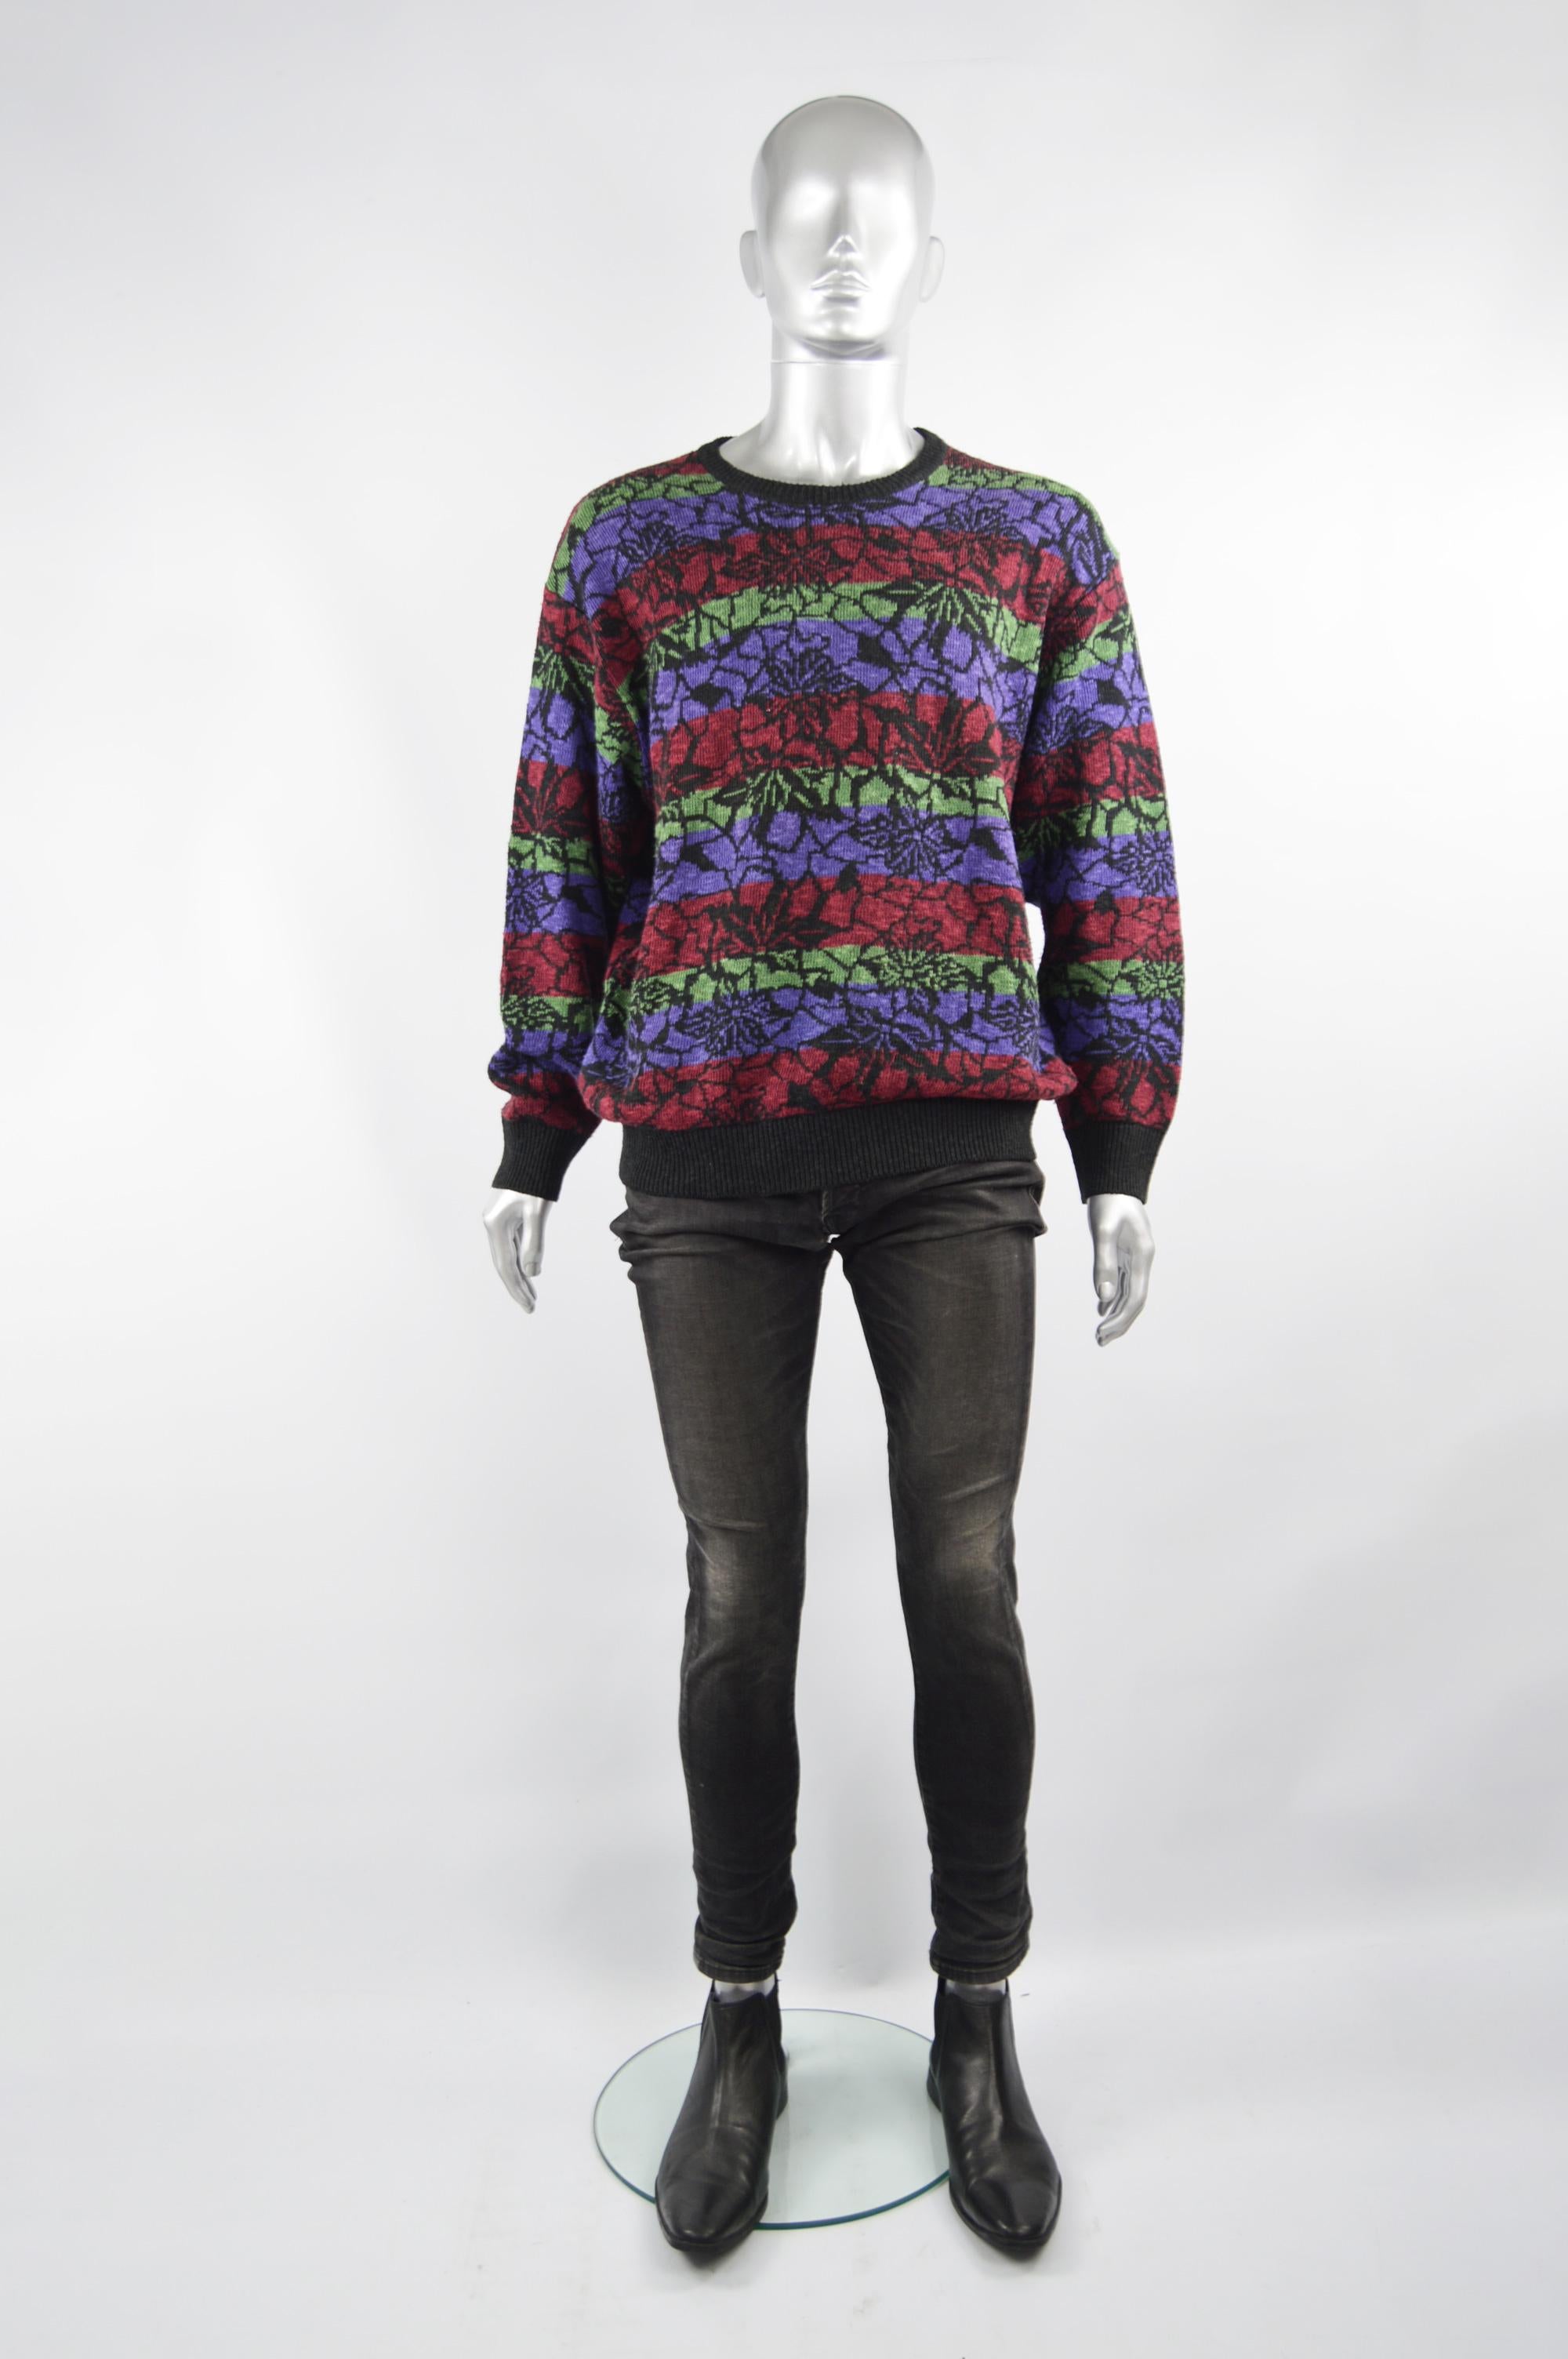 An amazing vintage men's sweater from the 80s by luxury French fashion house, Charles Jourdan. In a multicolored linen and cotton knit with a striped pattern and floral pattern over the top. 

Size: Marked XL but this gives an oversized, slouchy